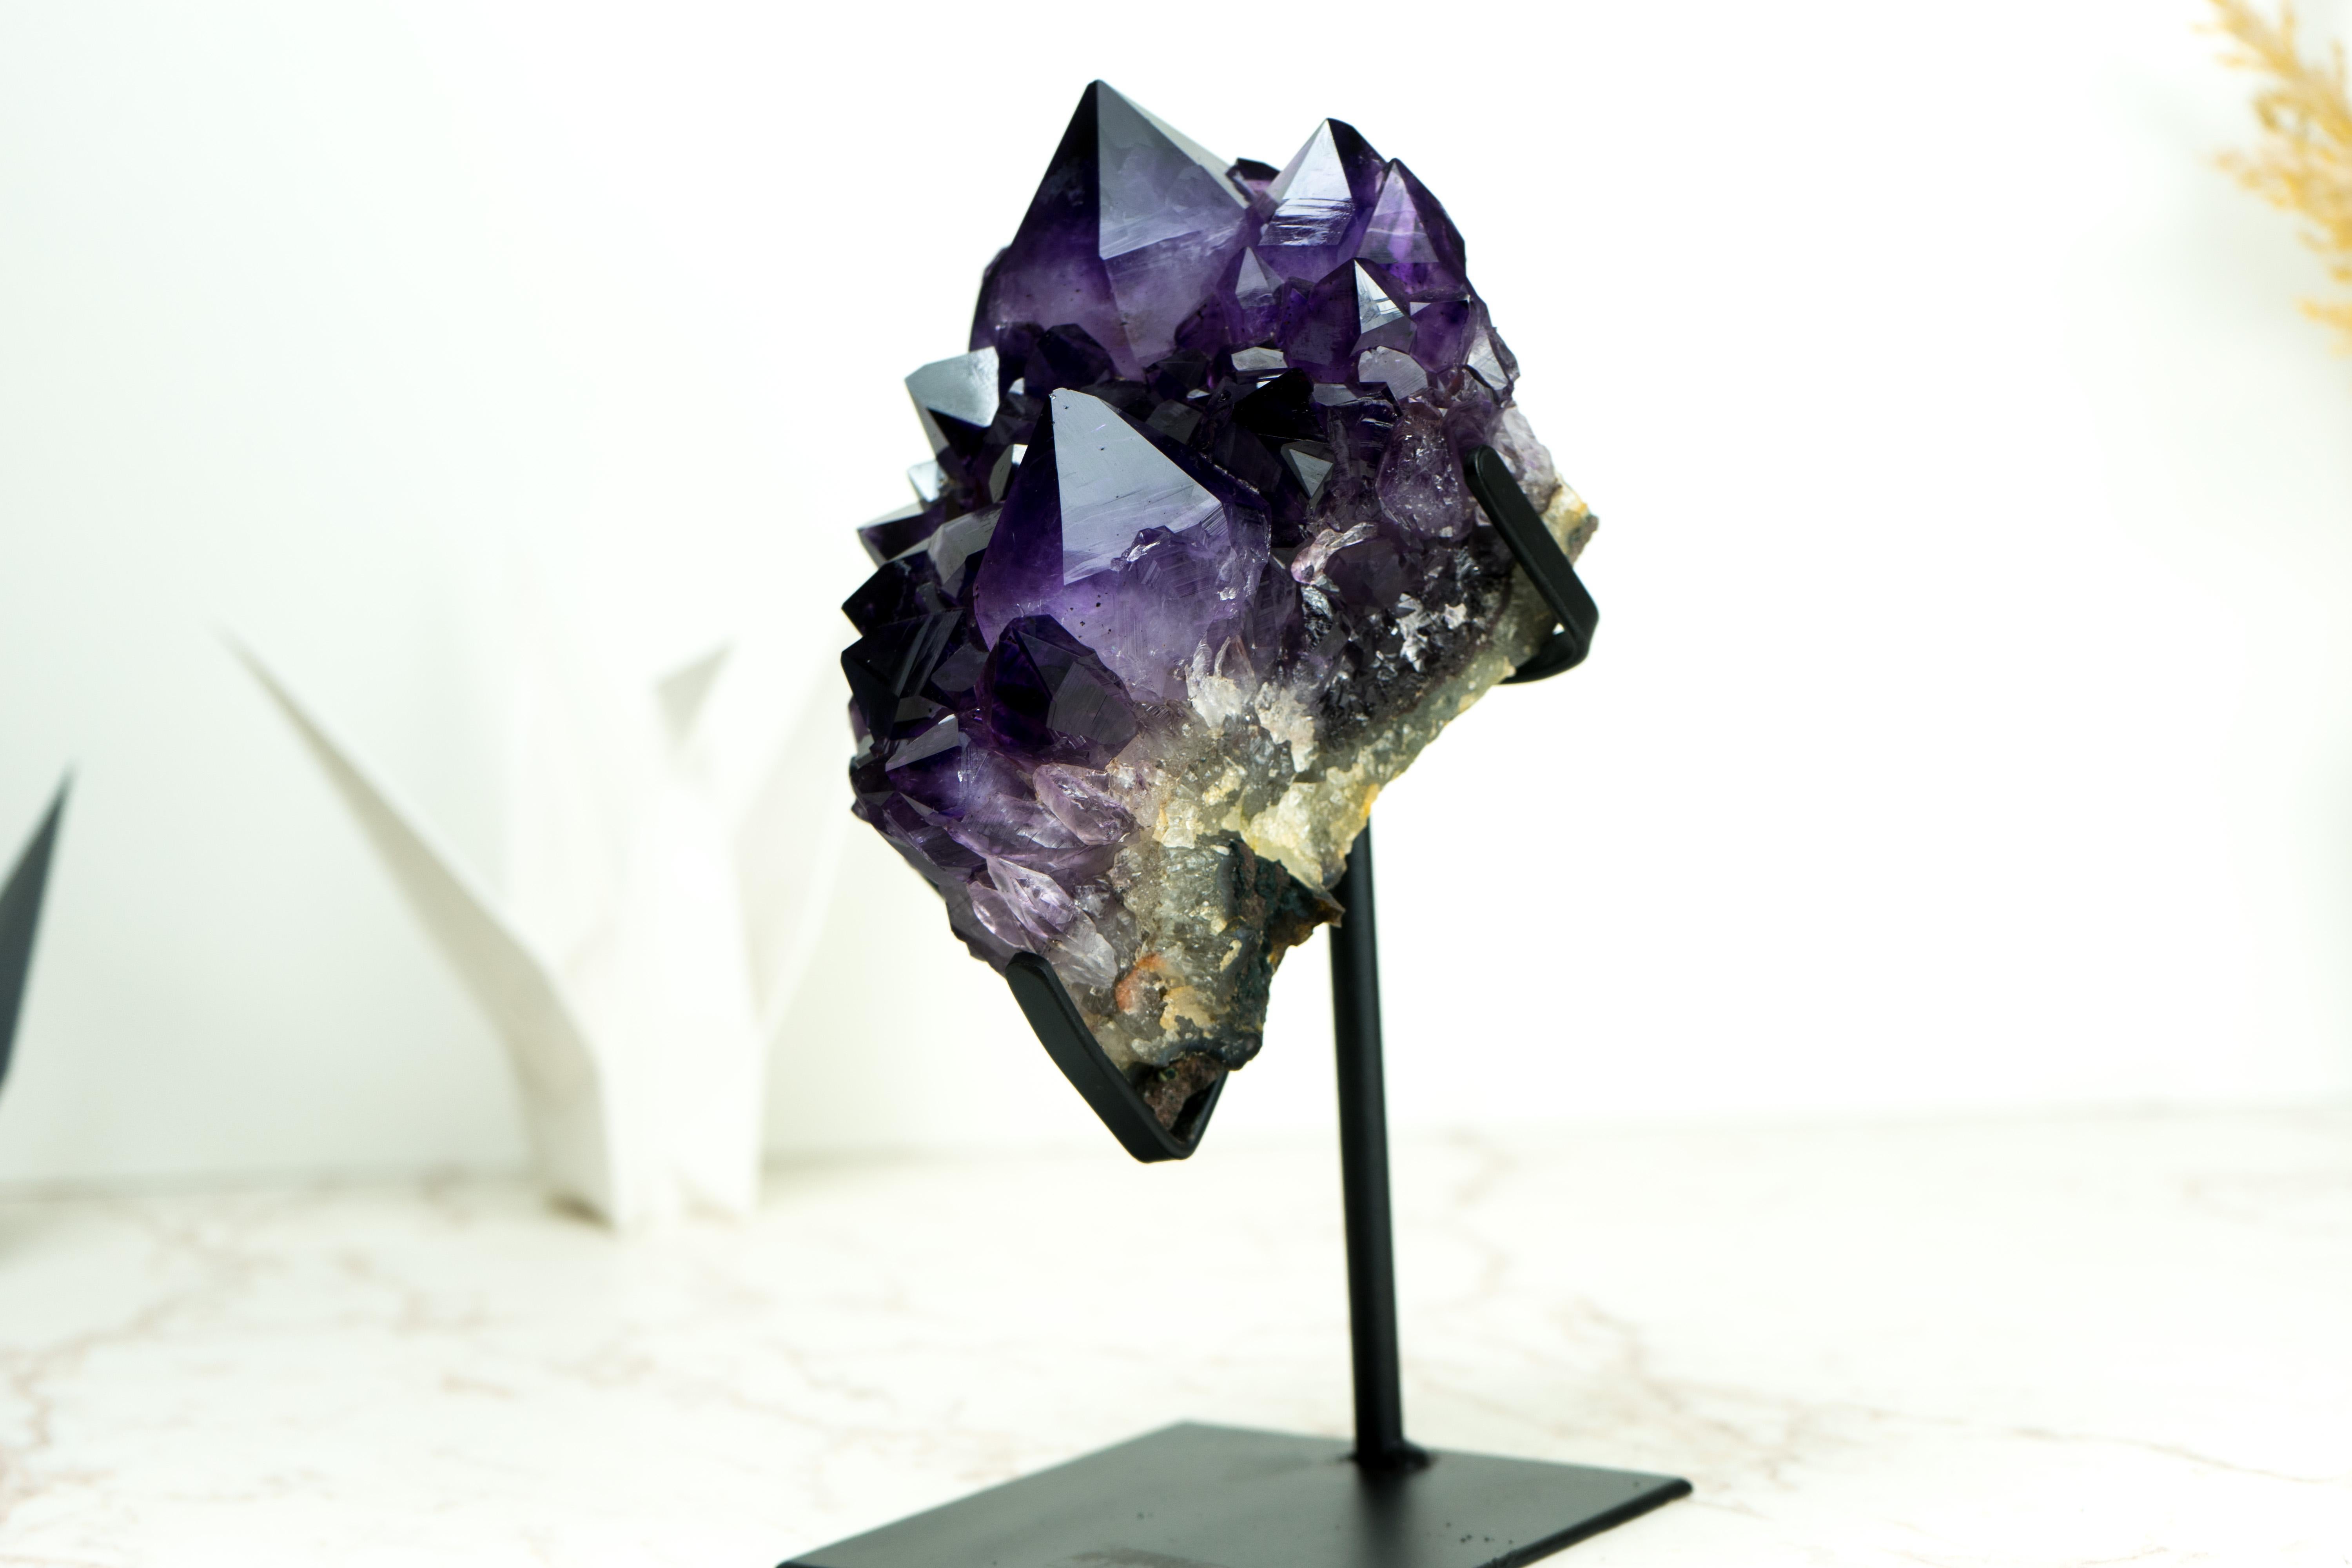 Agate Gallery Amethyst Cluster with Aesthetic Large Grape Jelly Amethyst Points For Sale